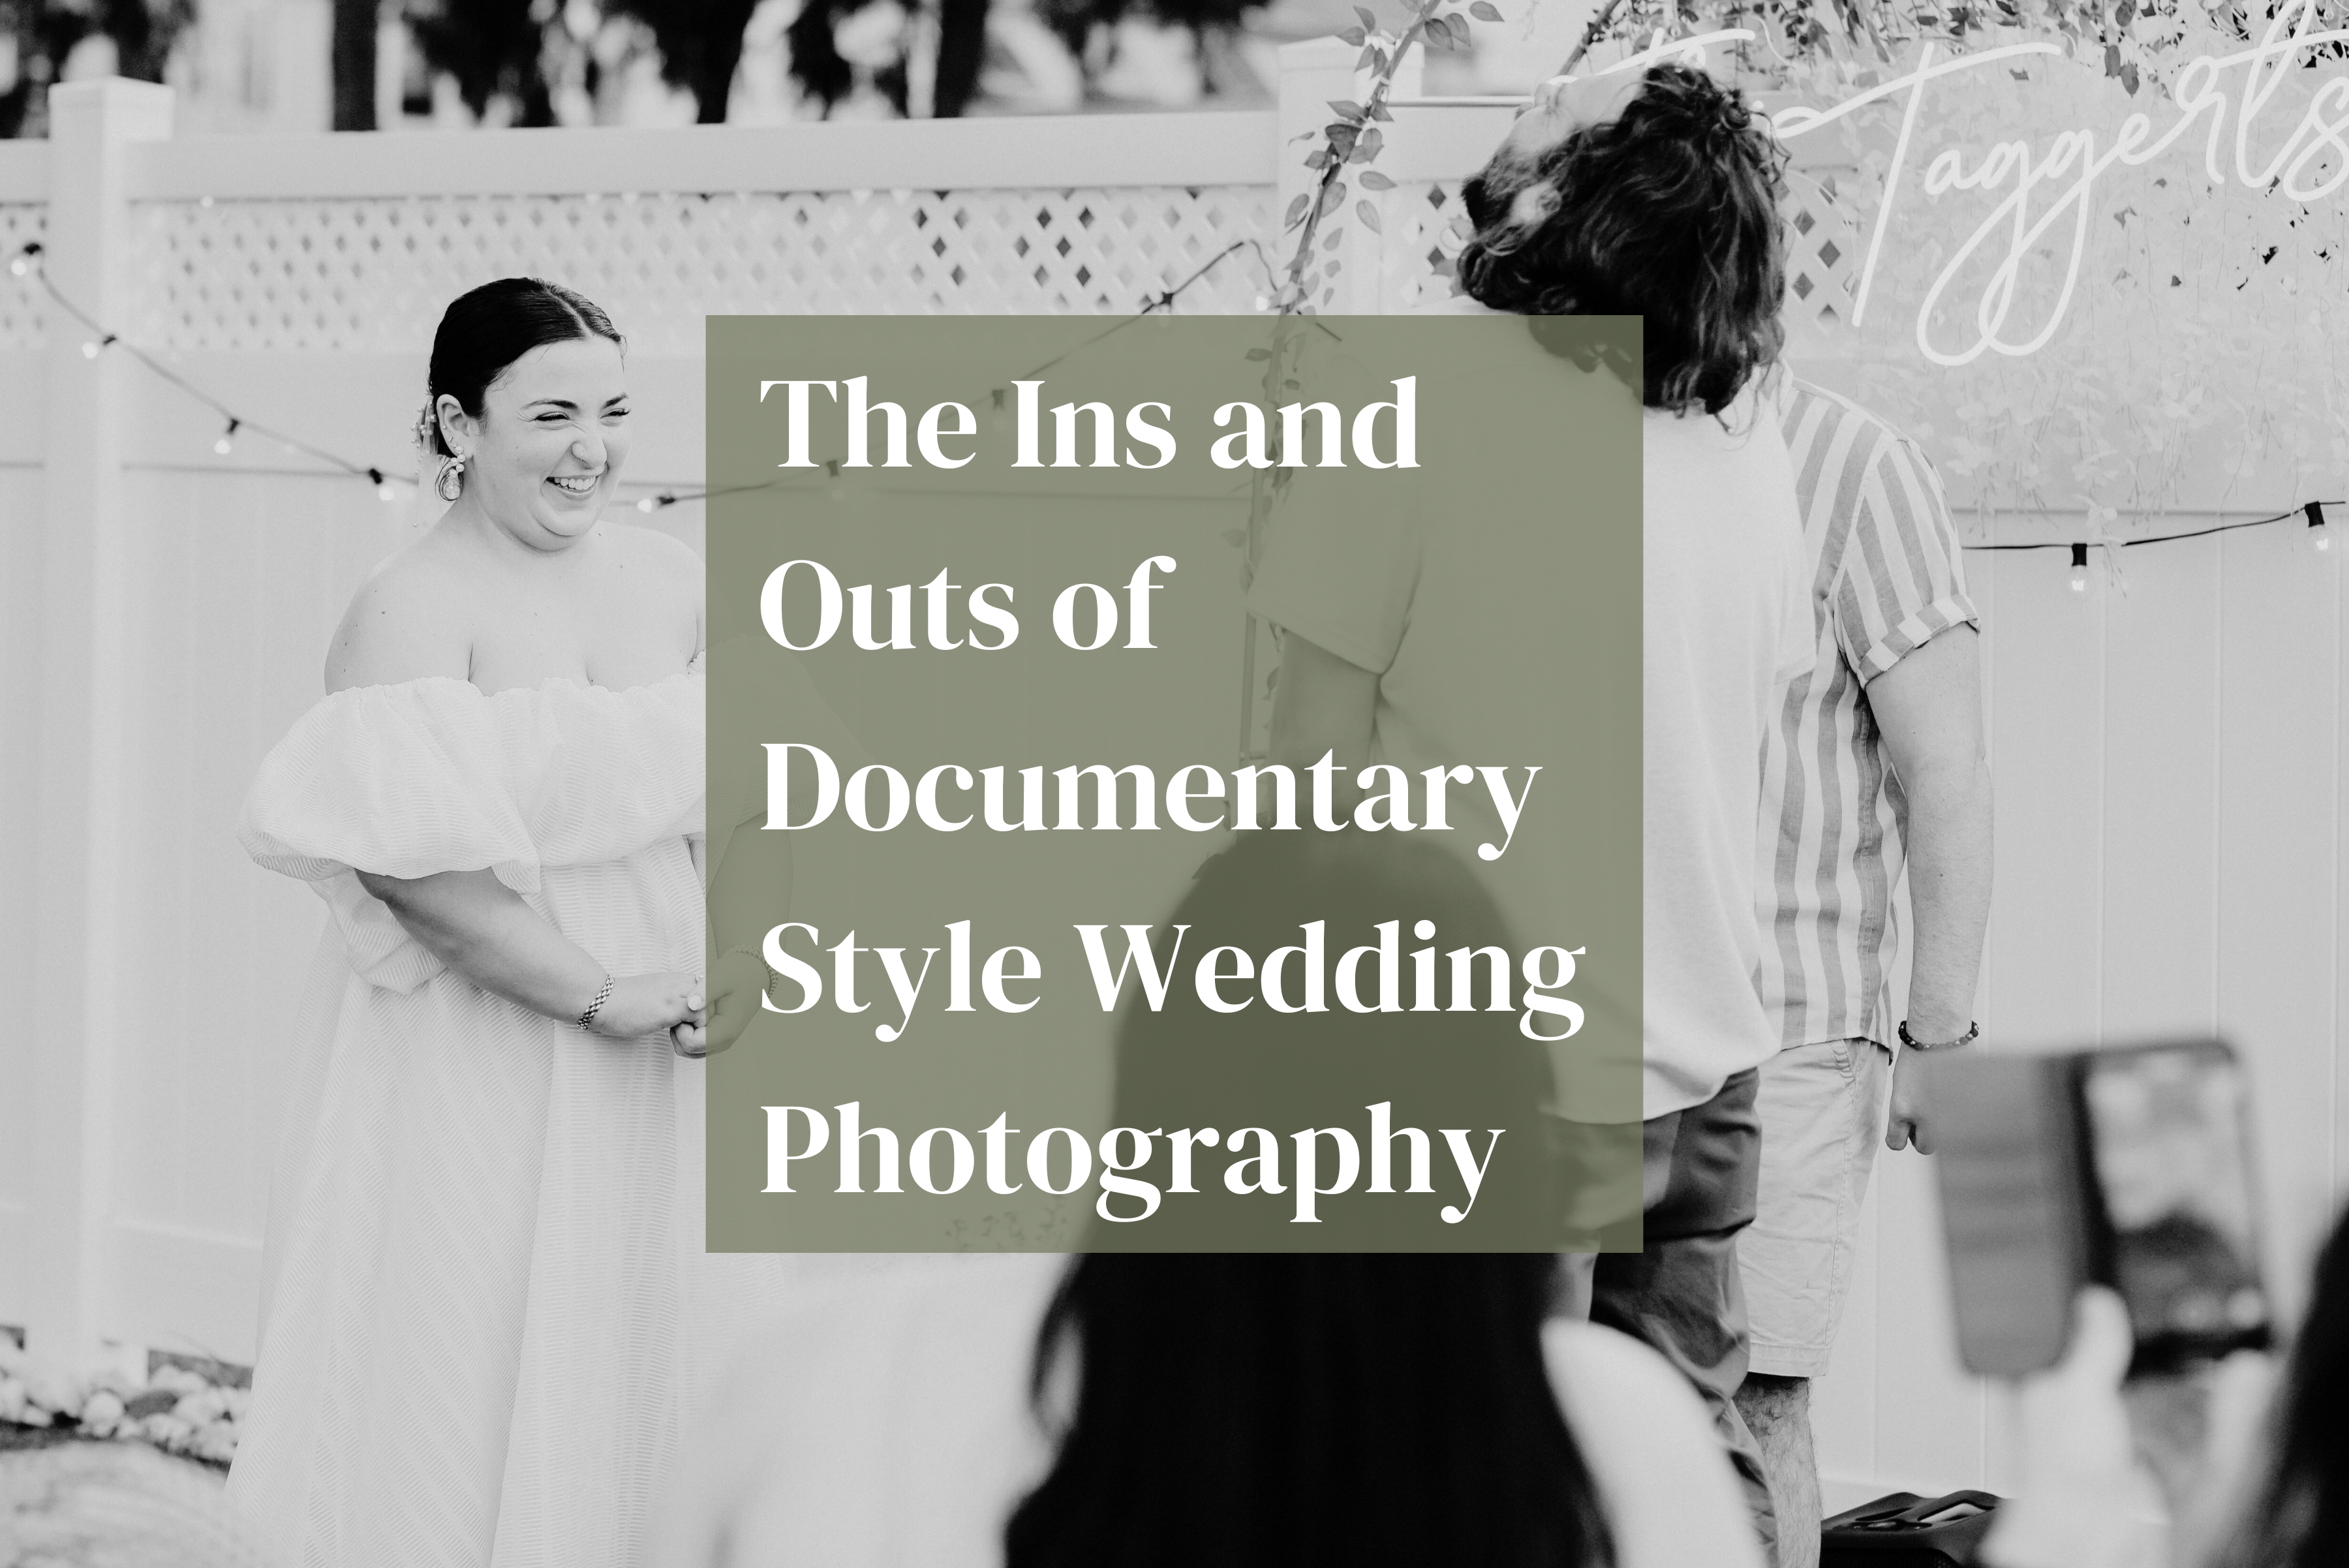 The Ins and Outs of Documentary-Style Wedding Photography.